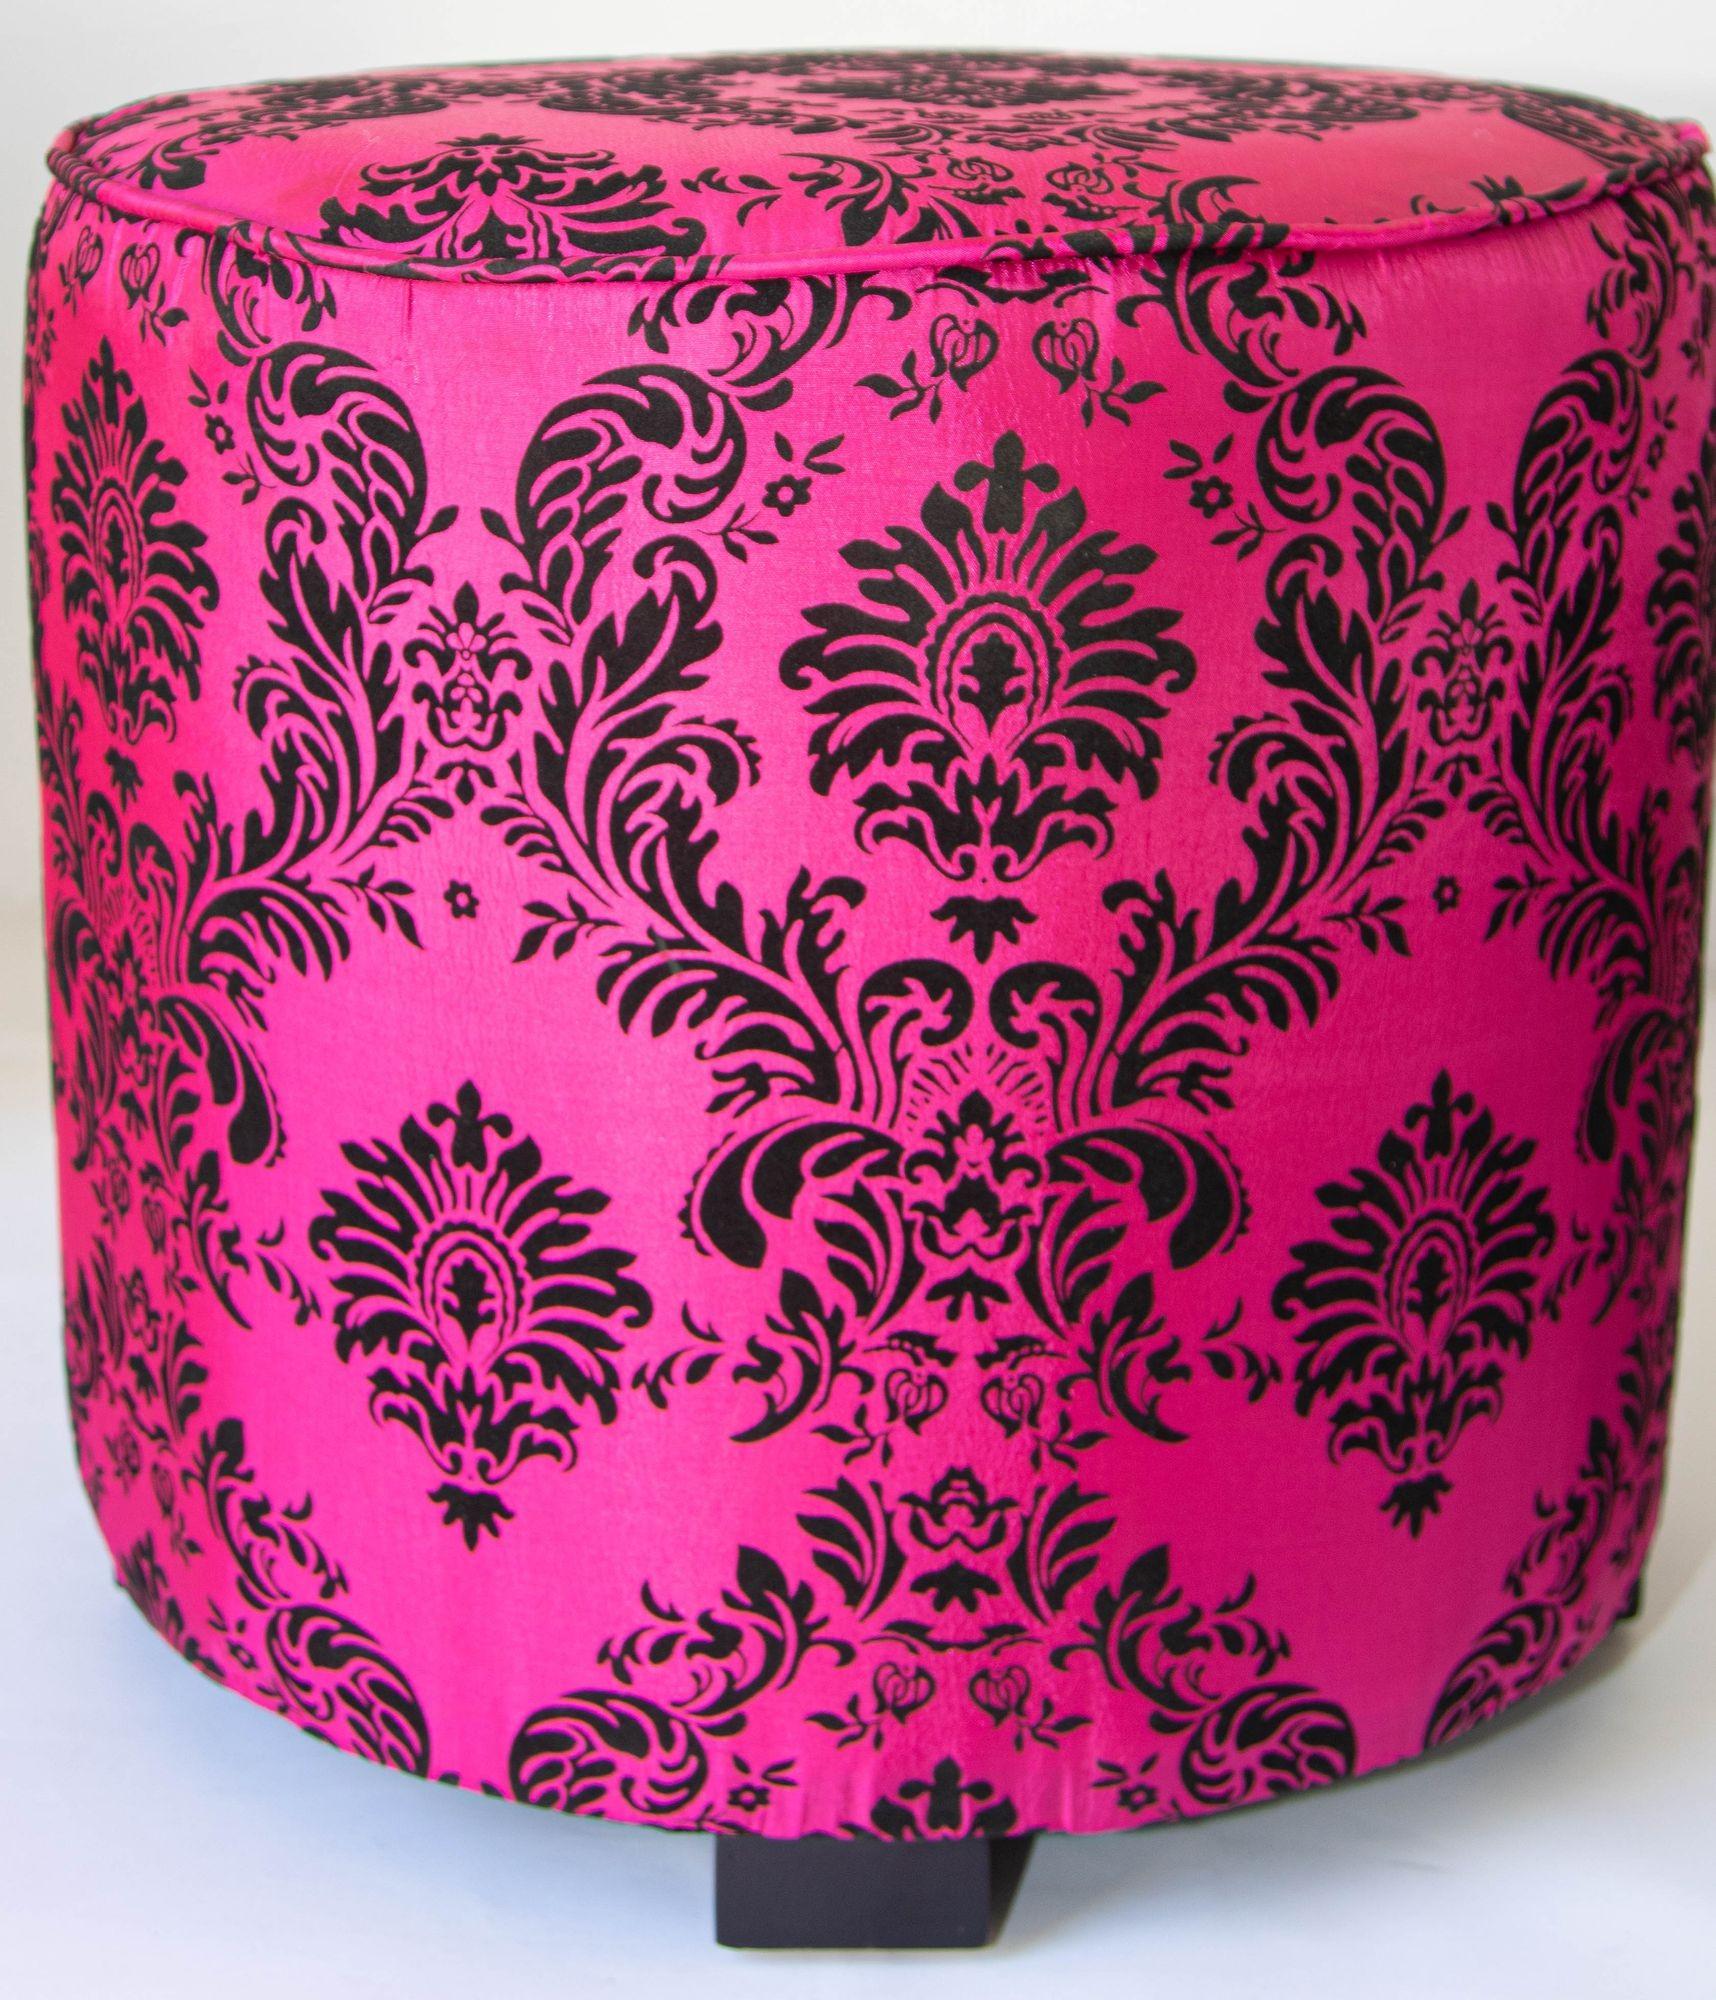 Vintage Fuchsia and Black Moroccan Round Upholstered Stools For Sale 5